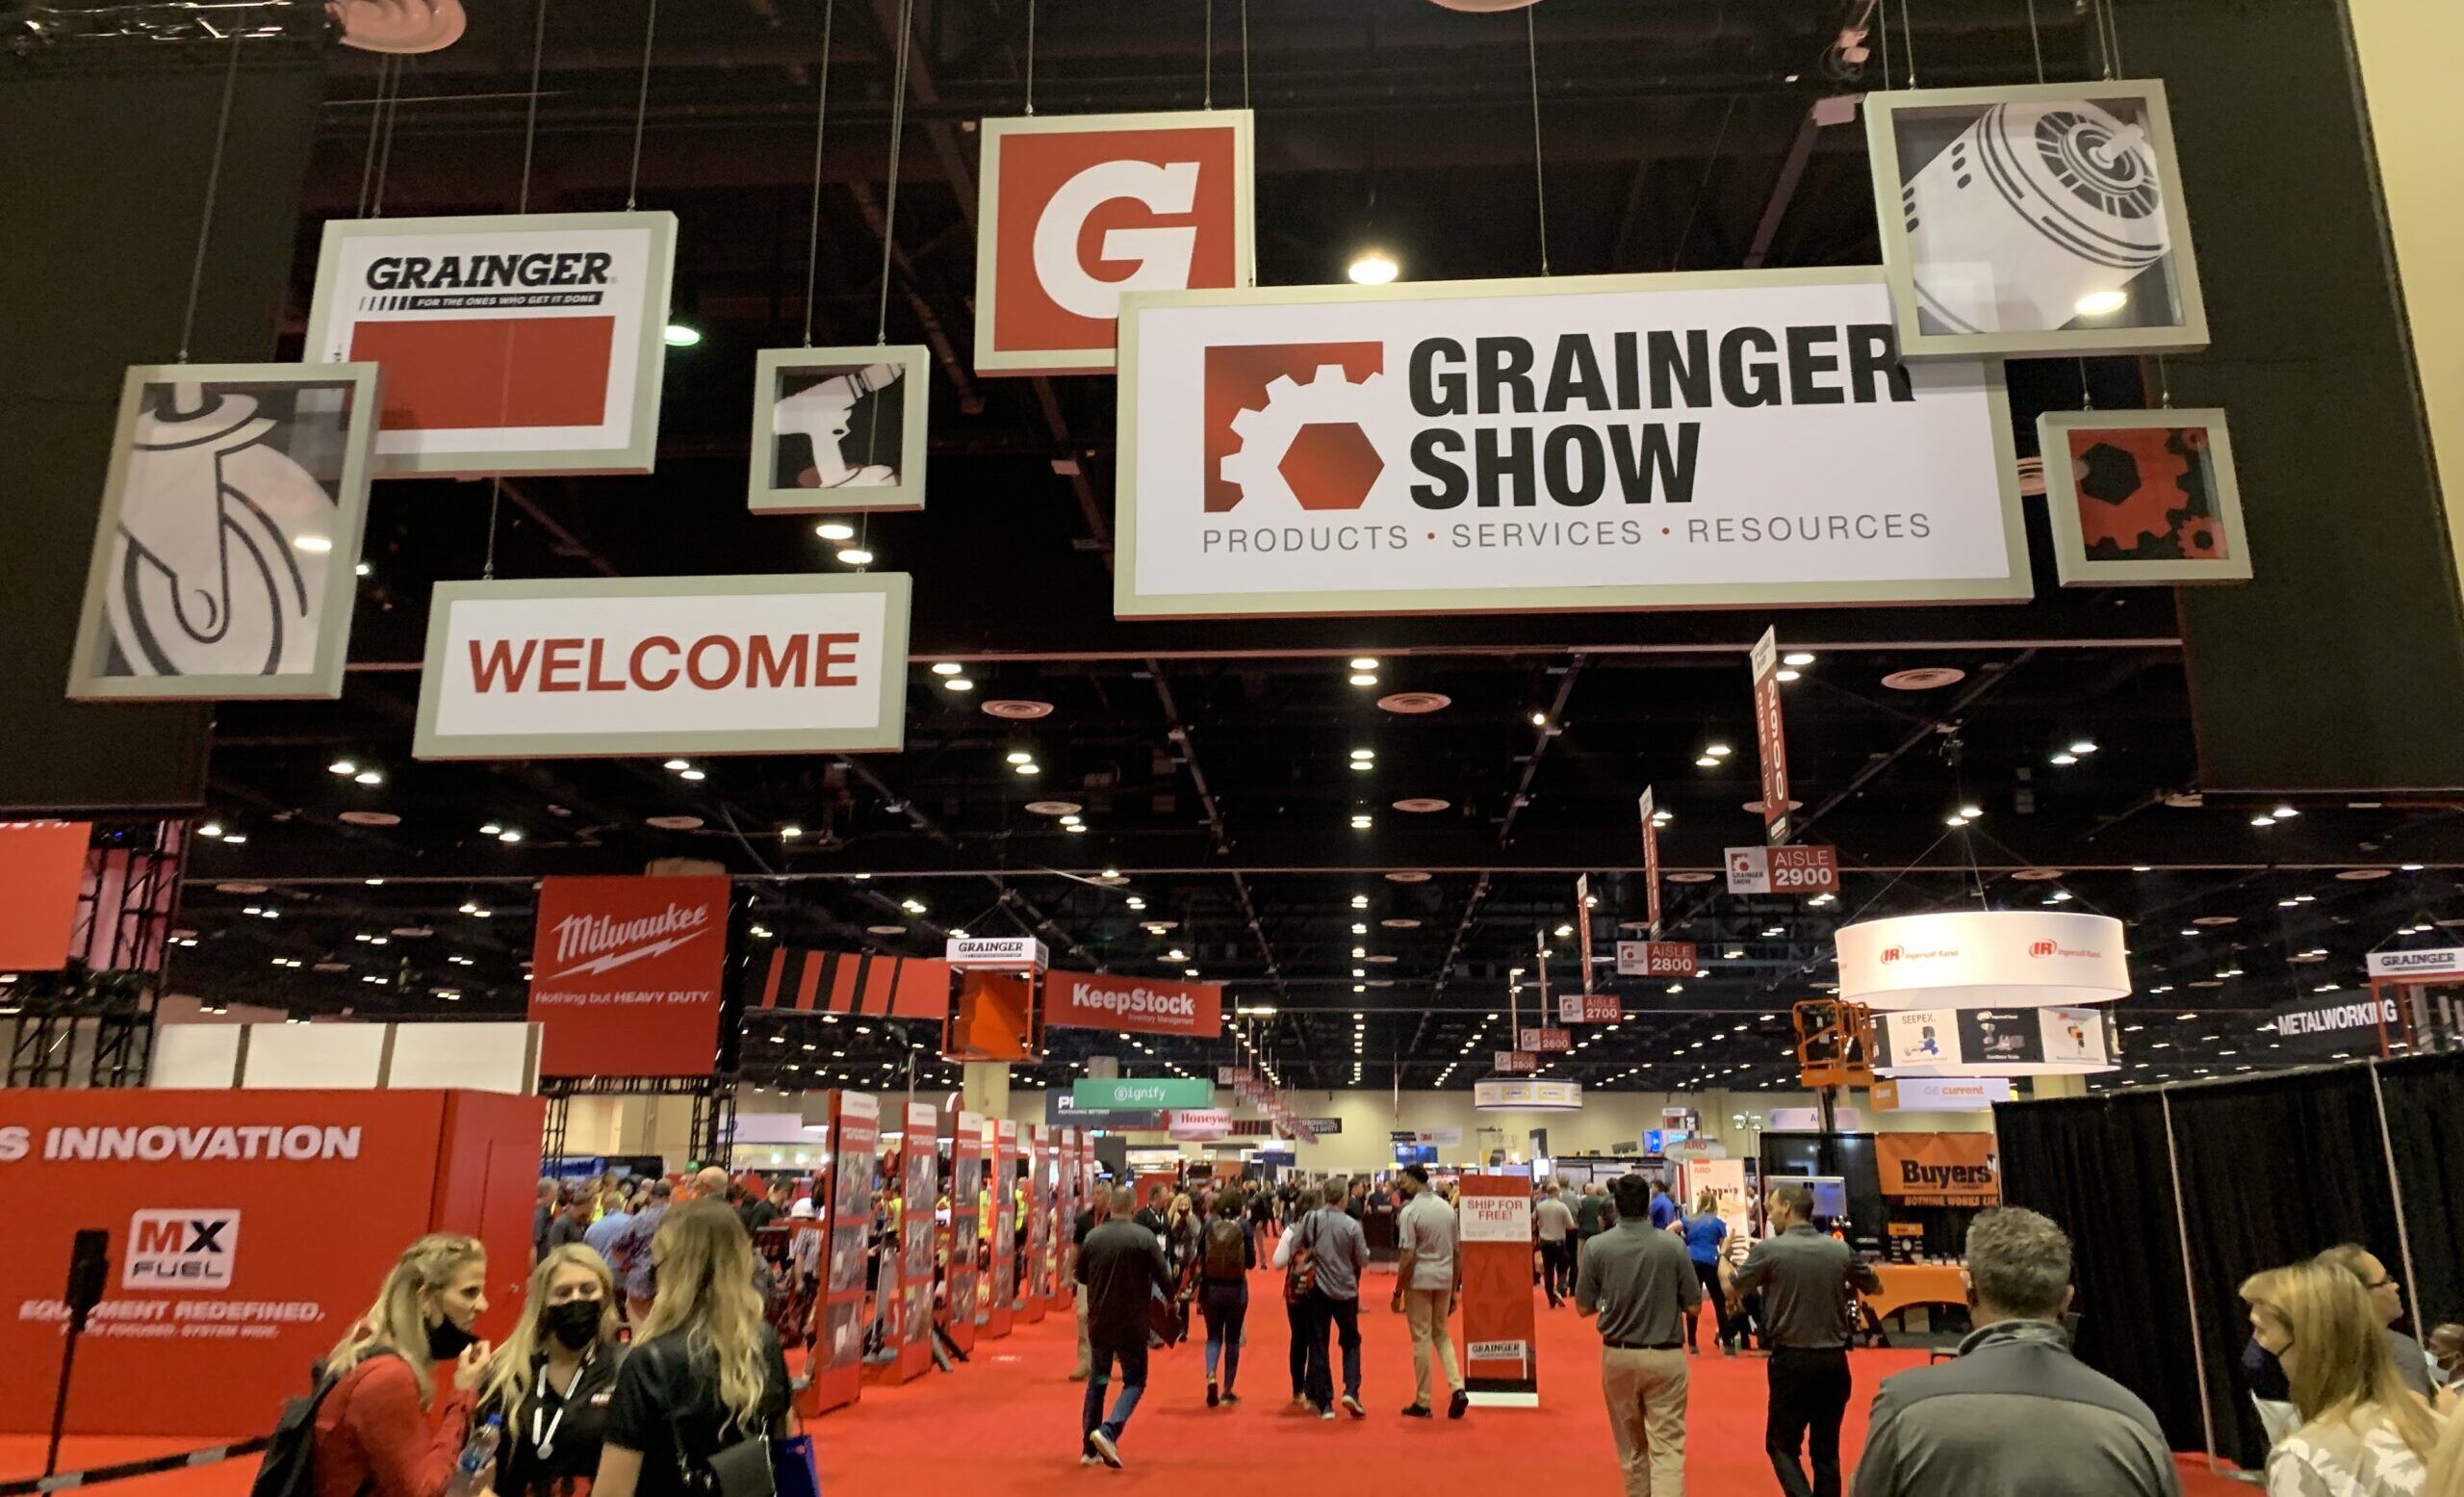 A look at the 2022 Grainger Show Floor at the Orlando Convention Center on Feb. 28.
Credit: MDM